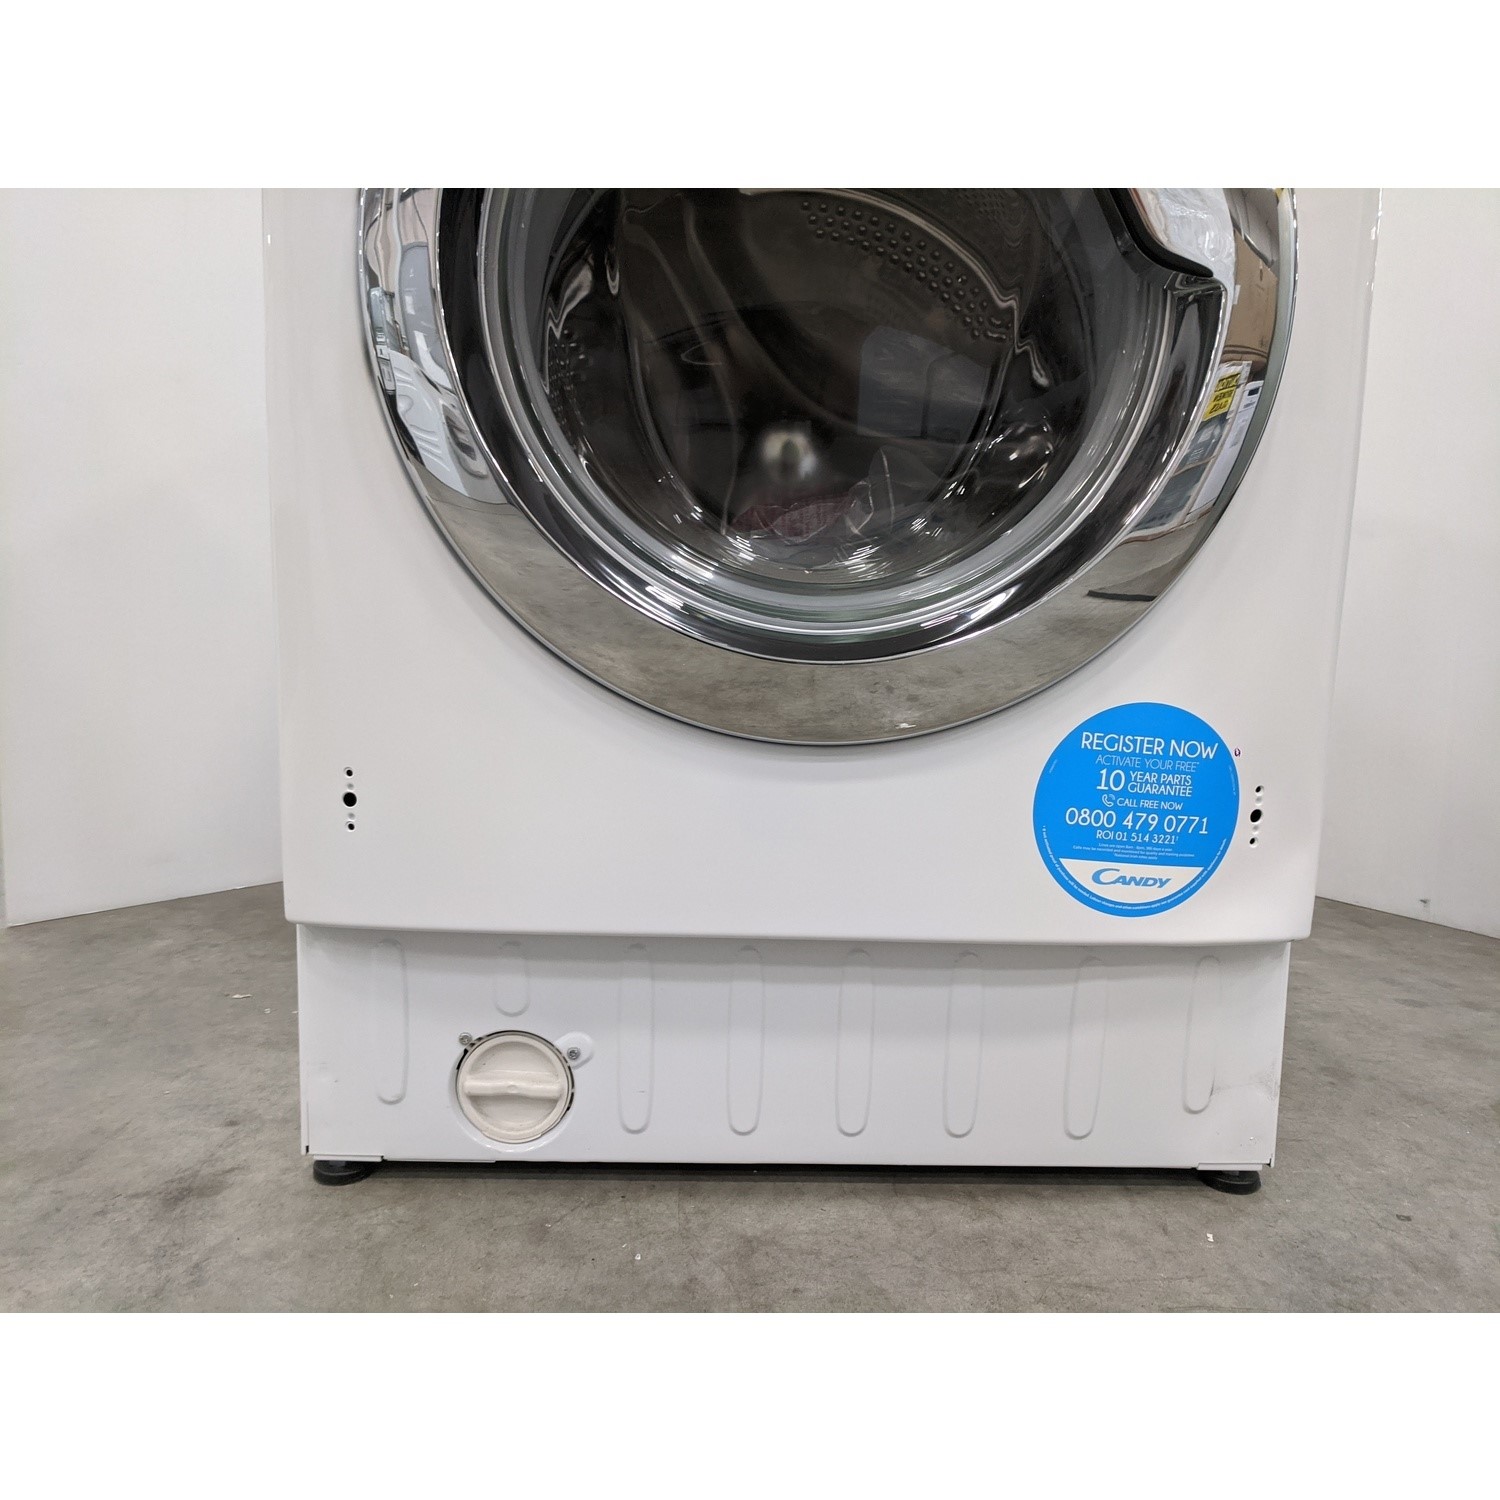 8Kg 1400 Spin Fully Integrated Washing Machine Candy CBWM814DC-80 A++ 